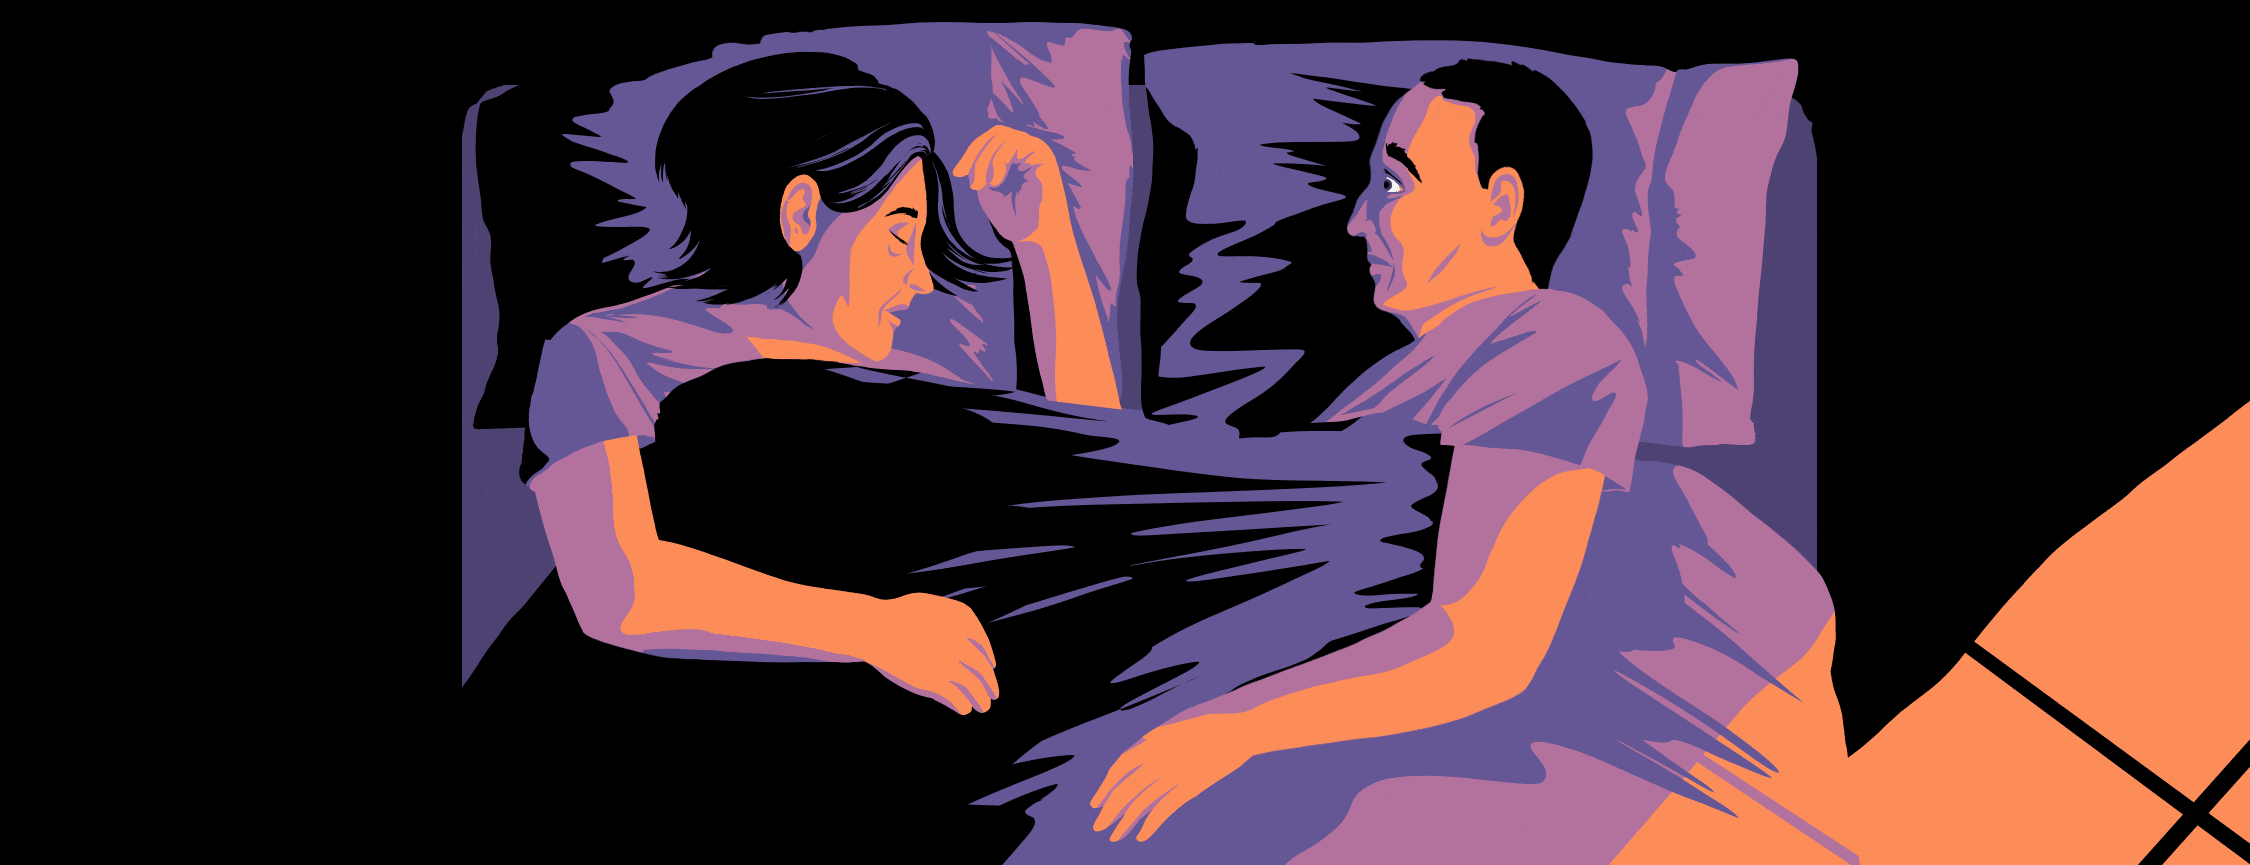 An couple lies facing each other in bed. The woman, who has Alzheimer’s, is asleep, breathing regularly, and the man is awake, watching her anxiously.